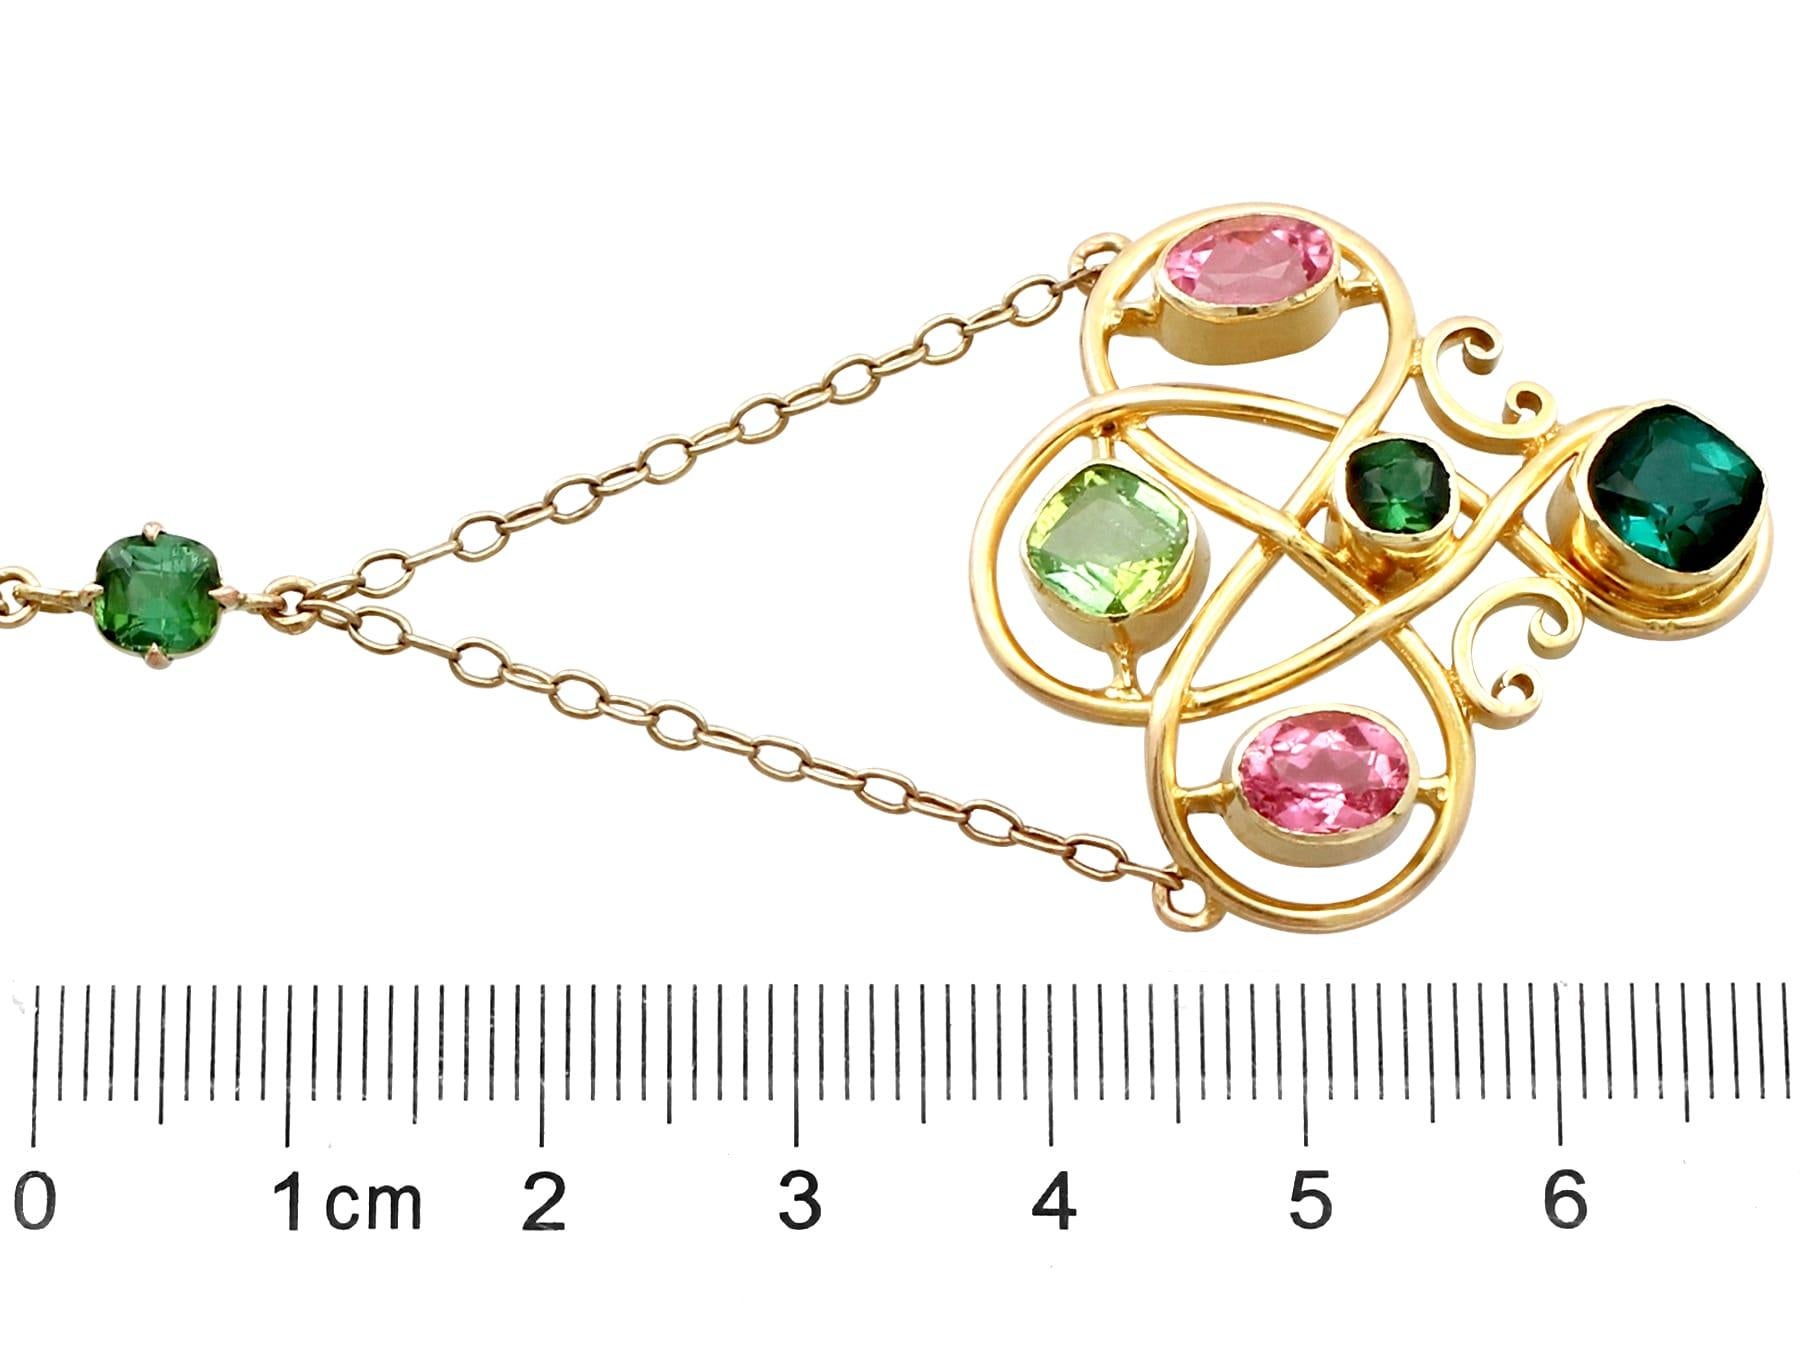 Antique Victorian 2.65 Carat Tourmaline and Peridot Yellow Gold Necklace For Sale 1